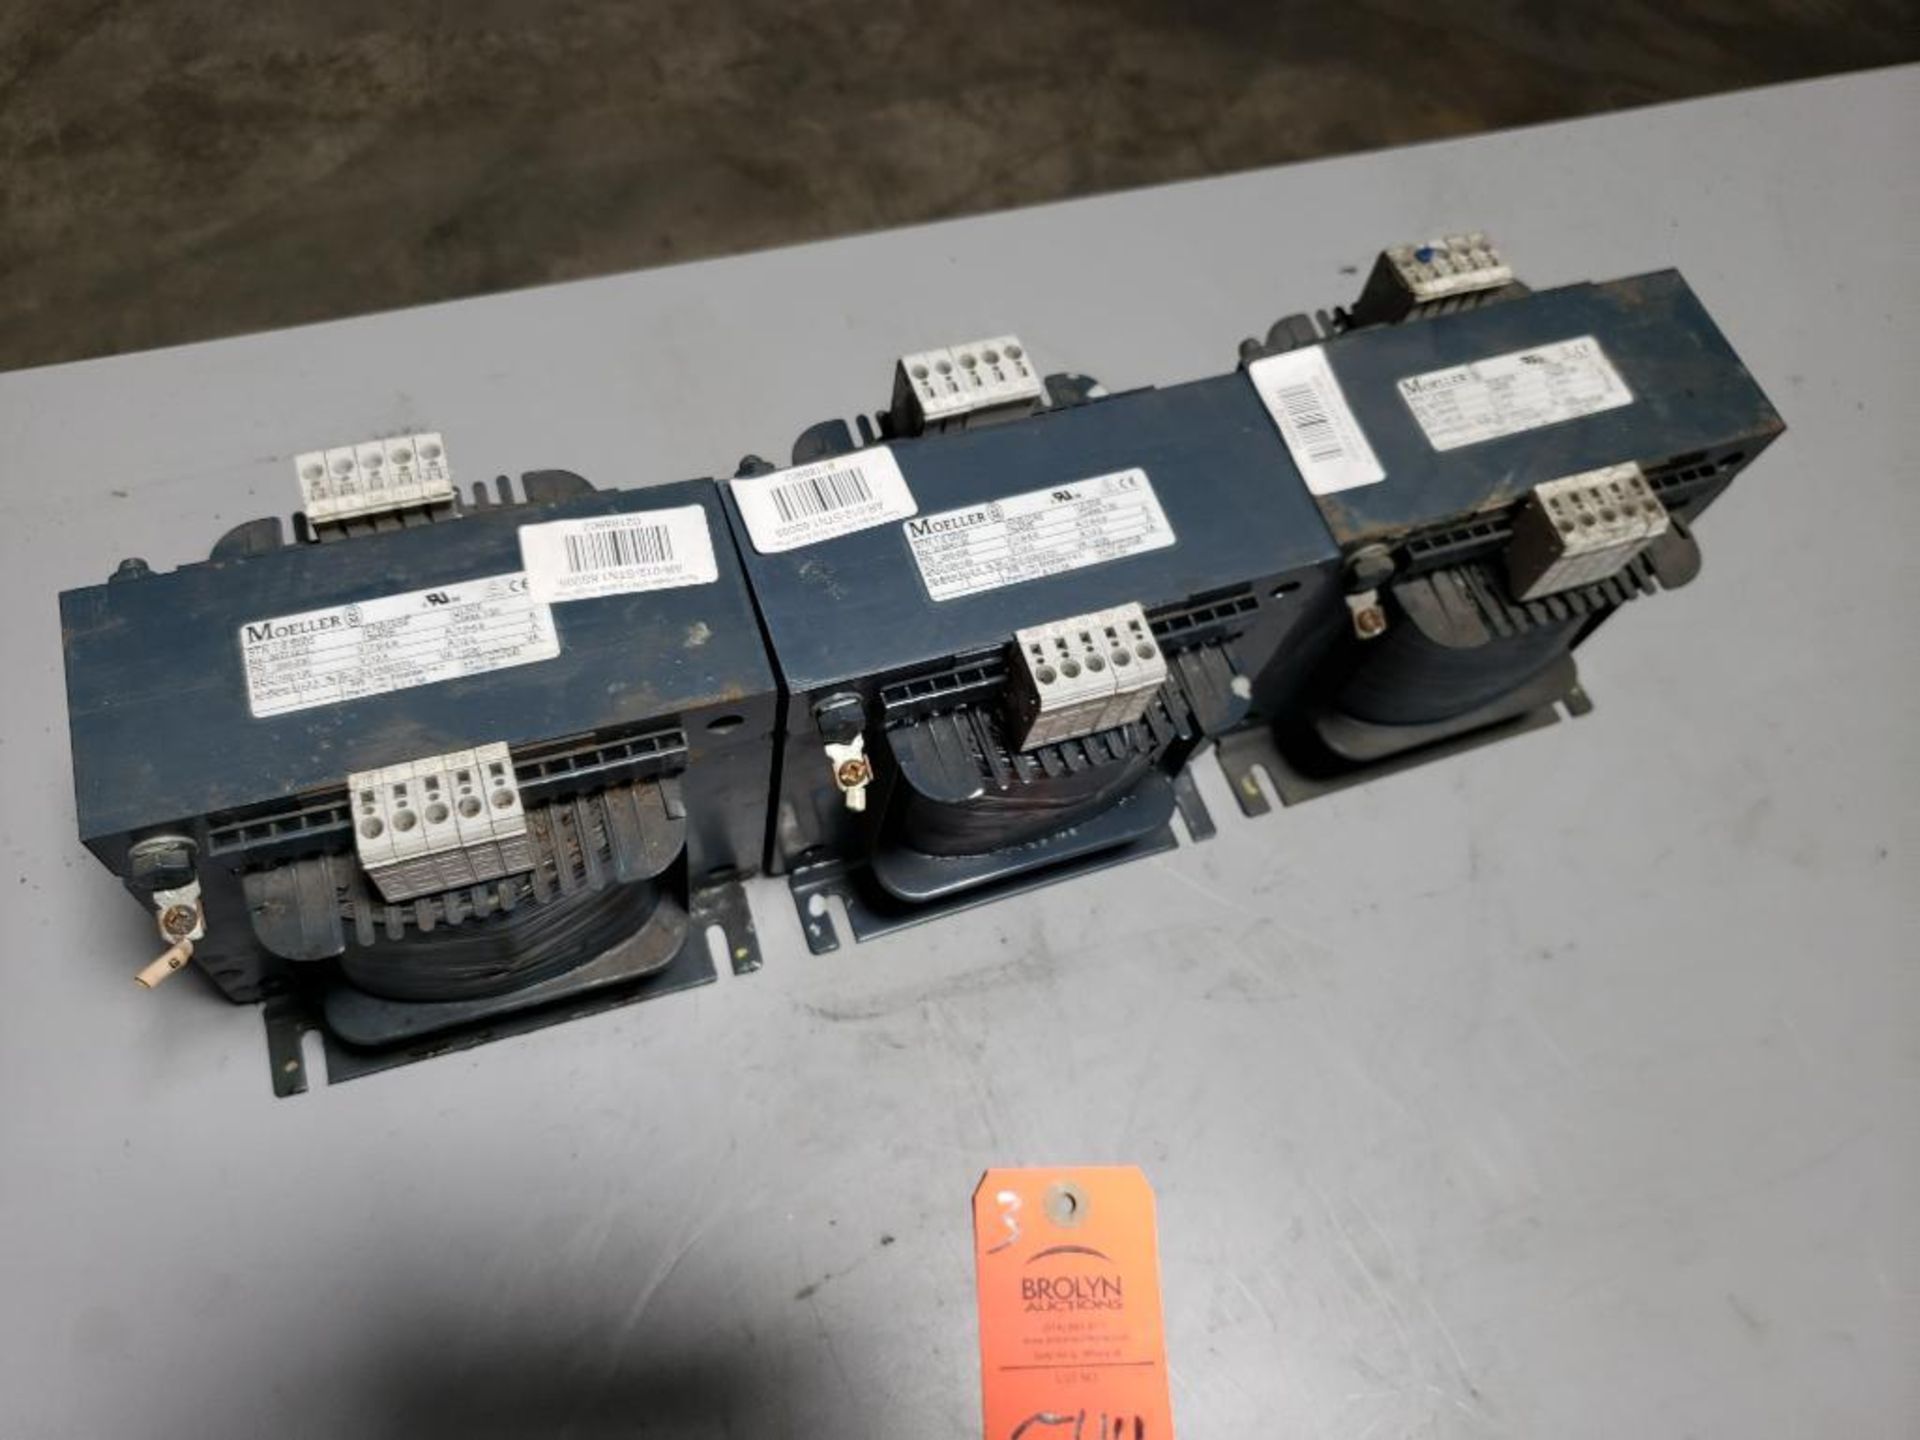 Qty 3 - Moeller STN 1.6 S005 single phase control transformer. - Image 3 of 3